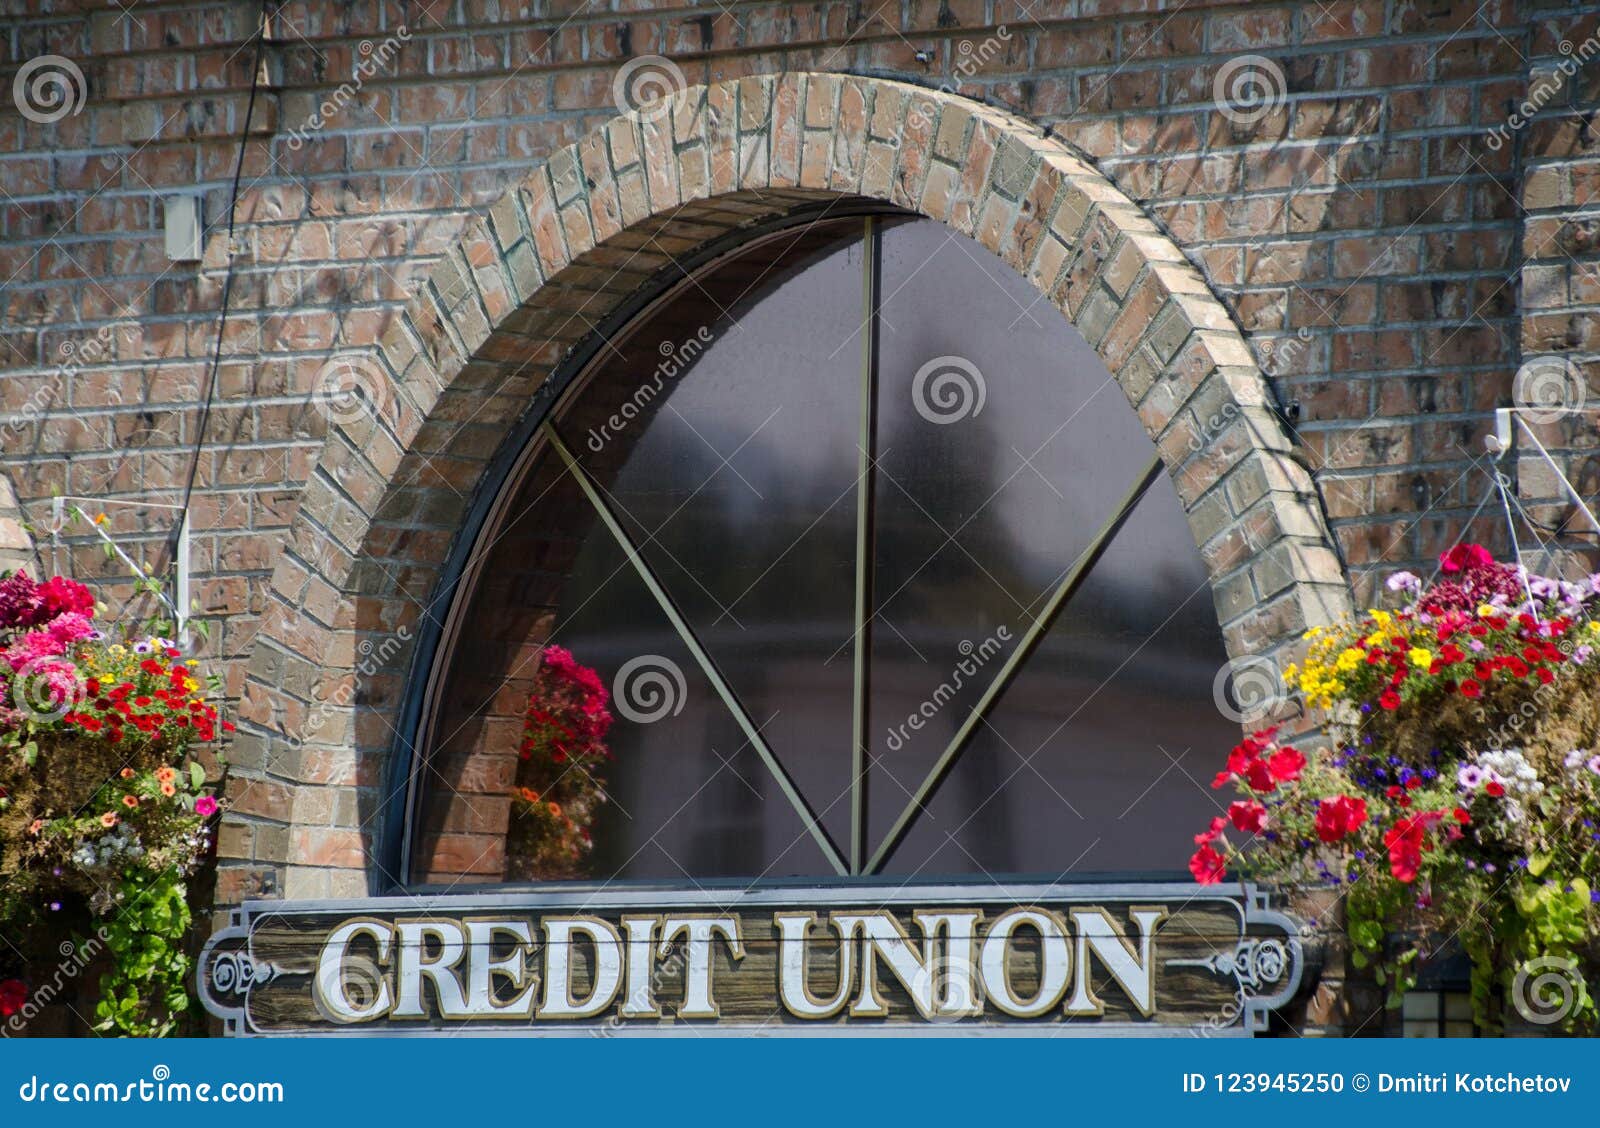 window of a credit union surrounded by flower baskets